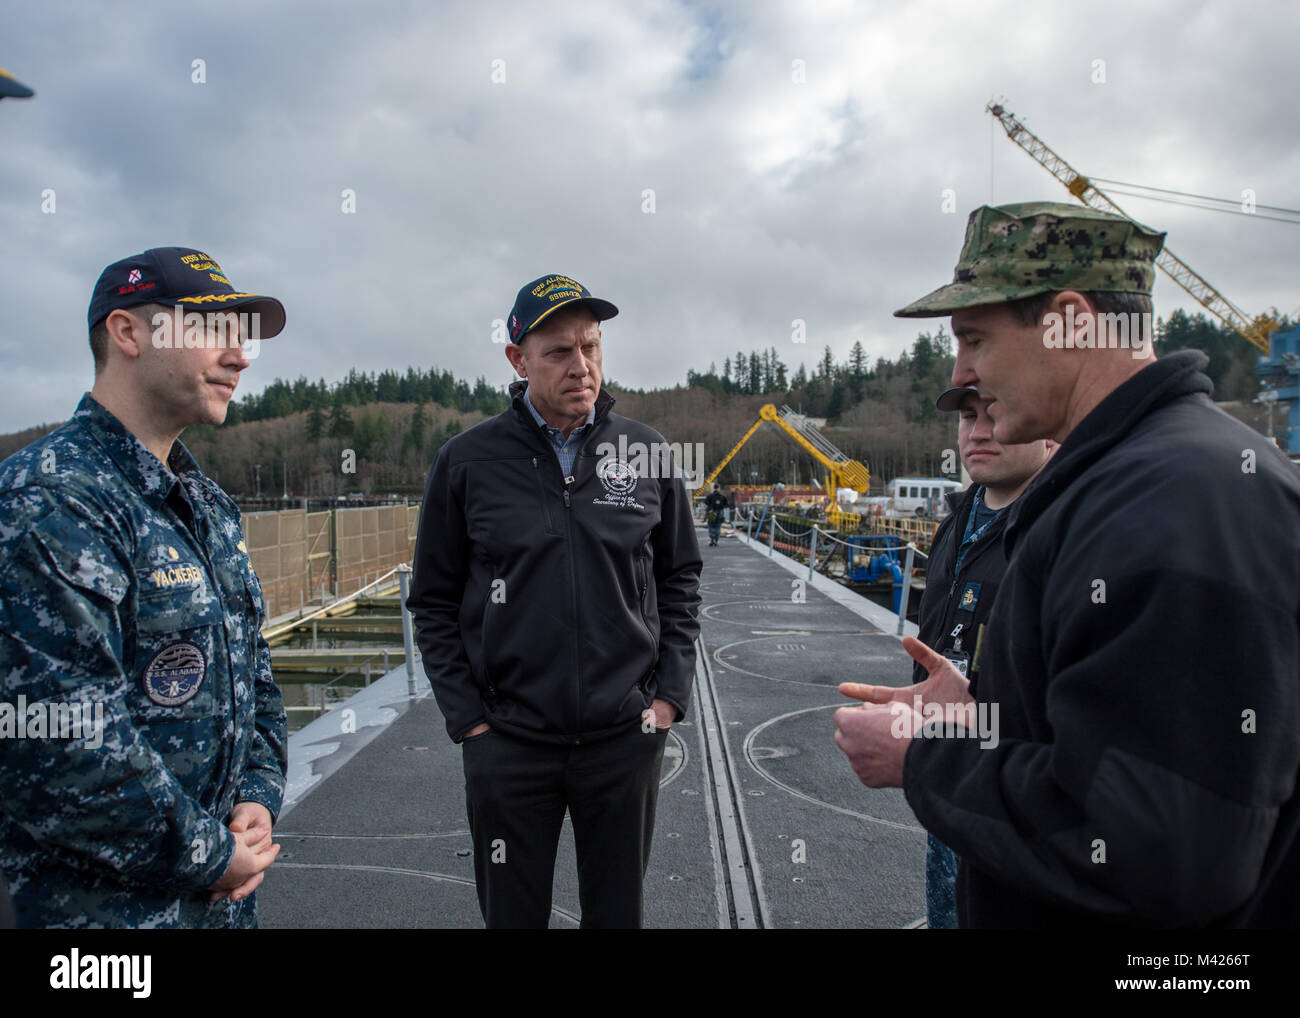 BANGOR, Wash. (Feb. 9, 2018) - Cmdr. Jeffery Yackeren, commanding officer Ohio-class ballistic missile submarine USS Alabama (SSBN 731), gives tour to Deputy Secretary of Defense Patrick Shanahan and facilities assigned to Commander Submarine Group 9 at Naval Base Kitsap-Bangor to see the operations of one leg of the nuclear triad. (U.S. Navy photo by Mass Communication Specialist 2nd Class Nancy C. diBenedetto/Released) Stock Photo